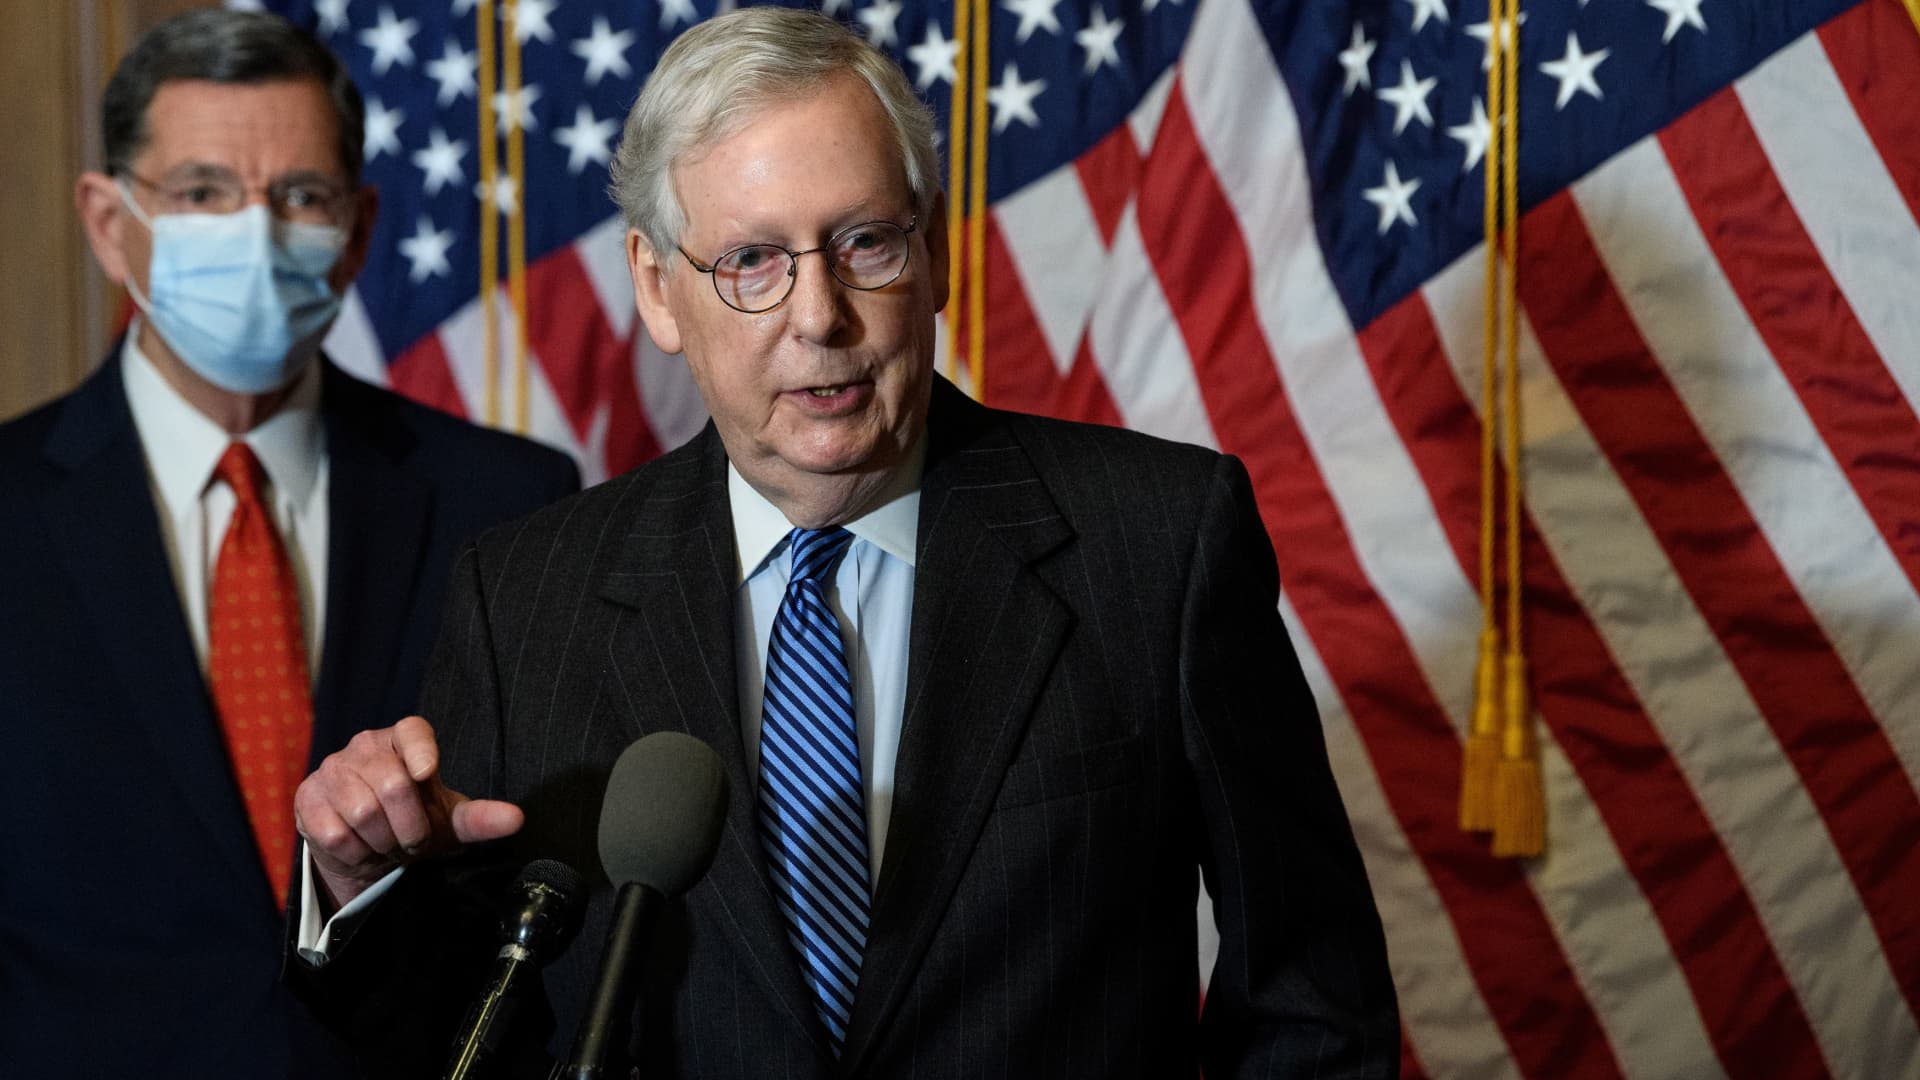 U.S. Senate Majority Leader Mitch McConnell (R-KY) speaks at a news conference at the U.S. Capitol in Washington, U.S., December 15, 2020.